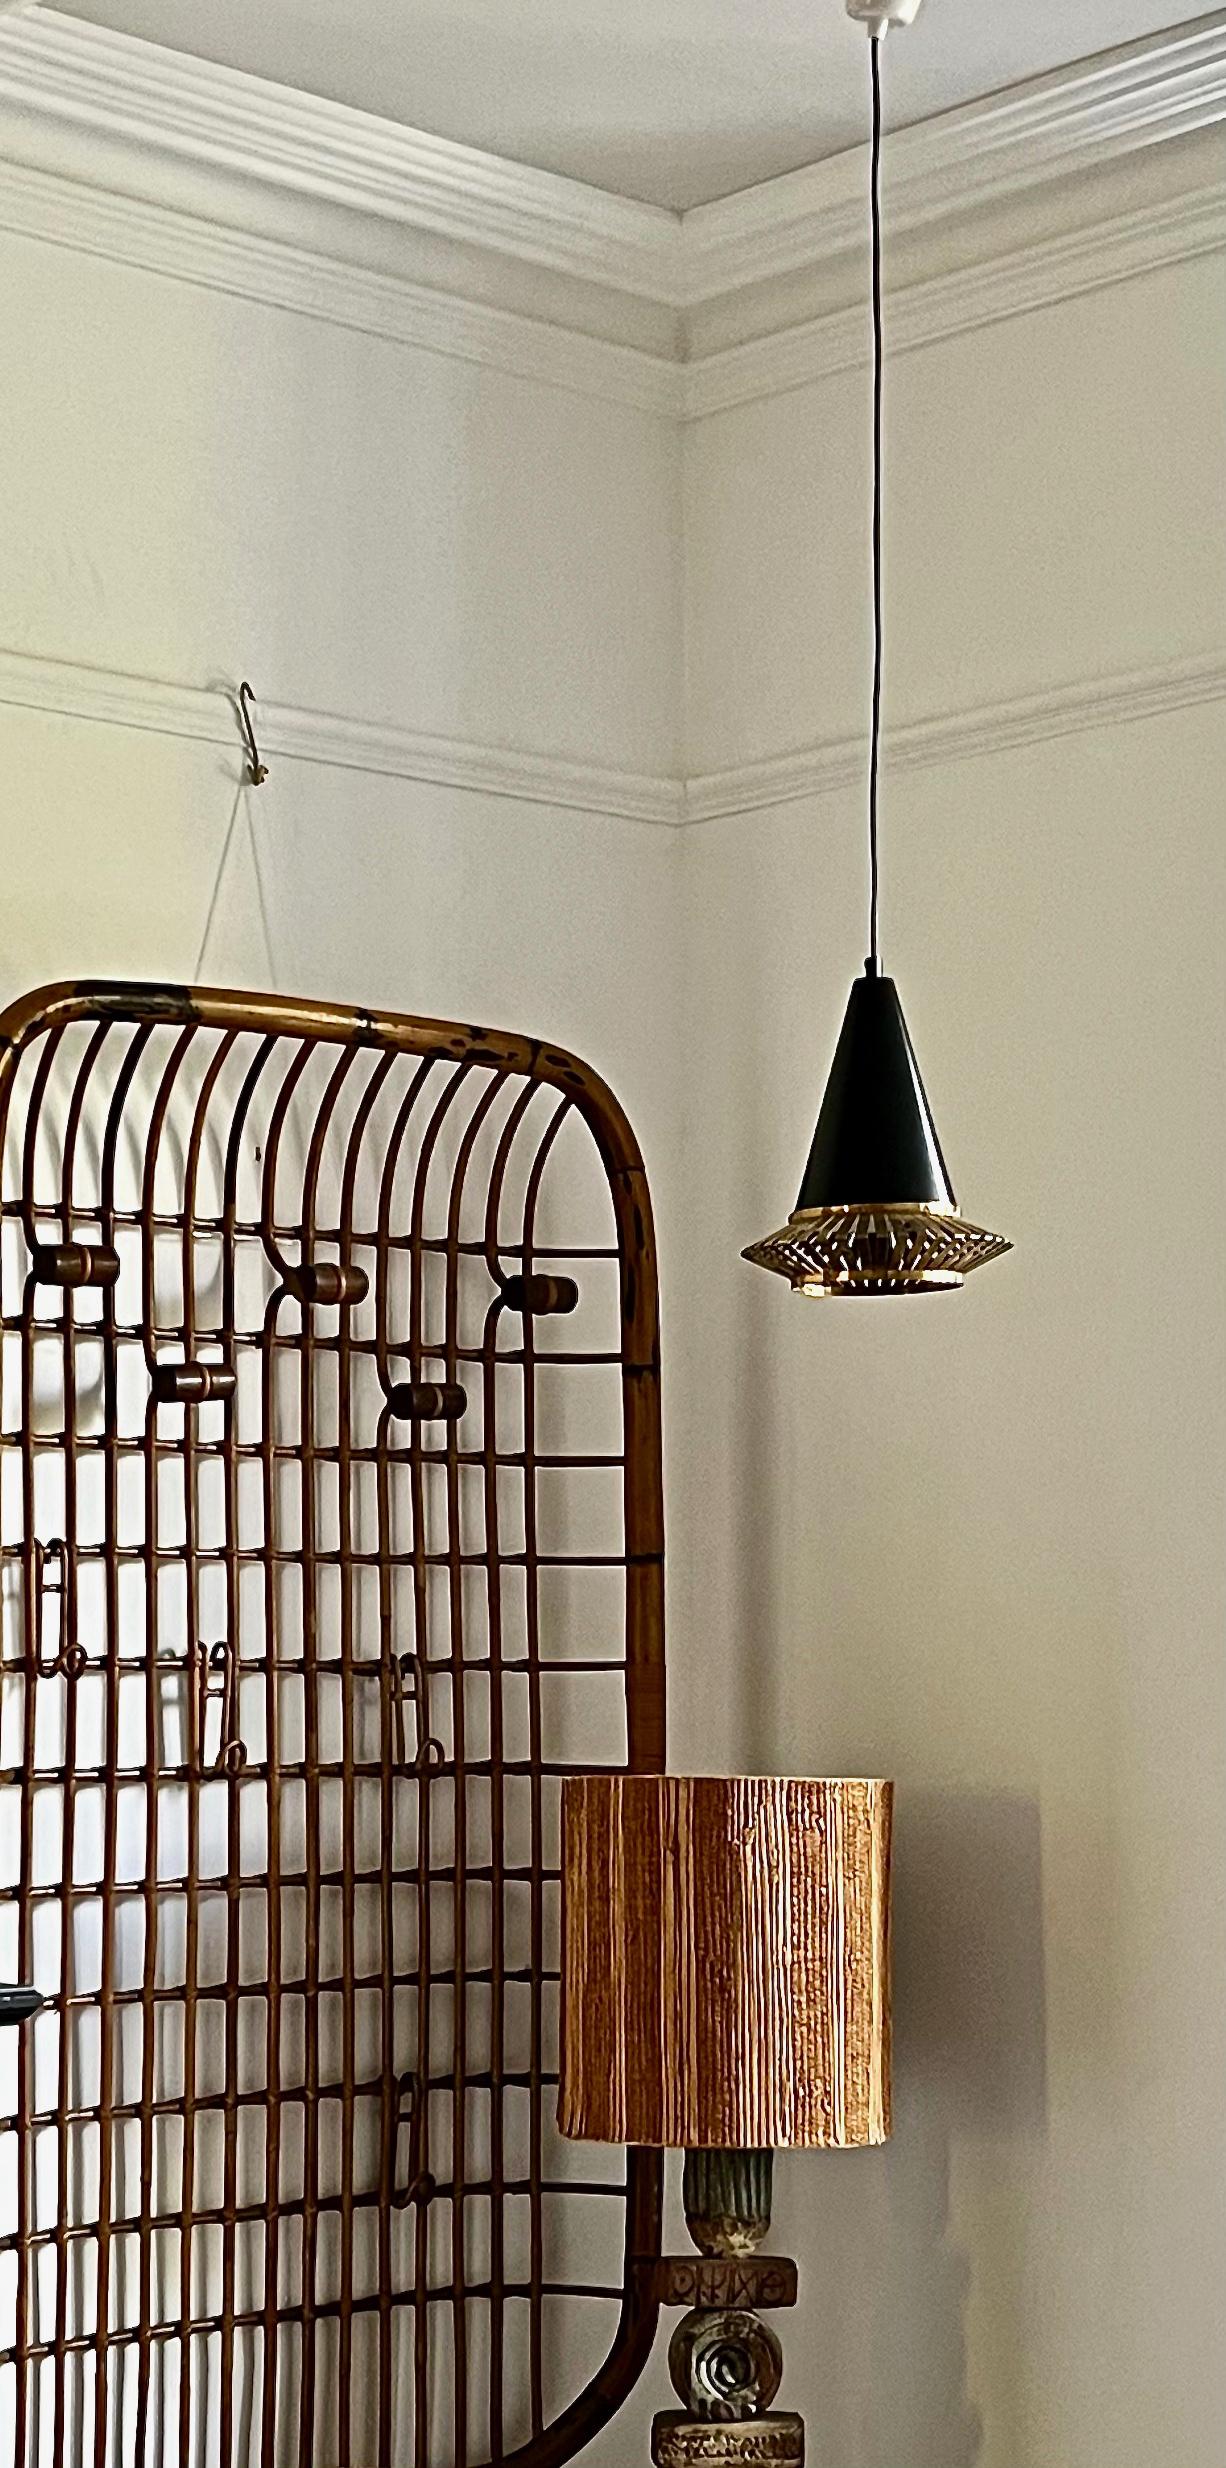 Pendant Lamp Model K 2-1 by Maria Lindeman for Idman of Finland Mid-20th Century For Sale 6